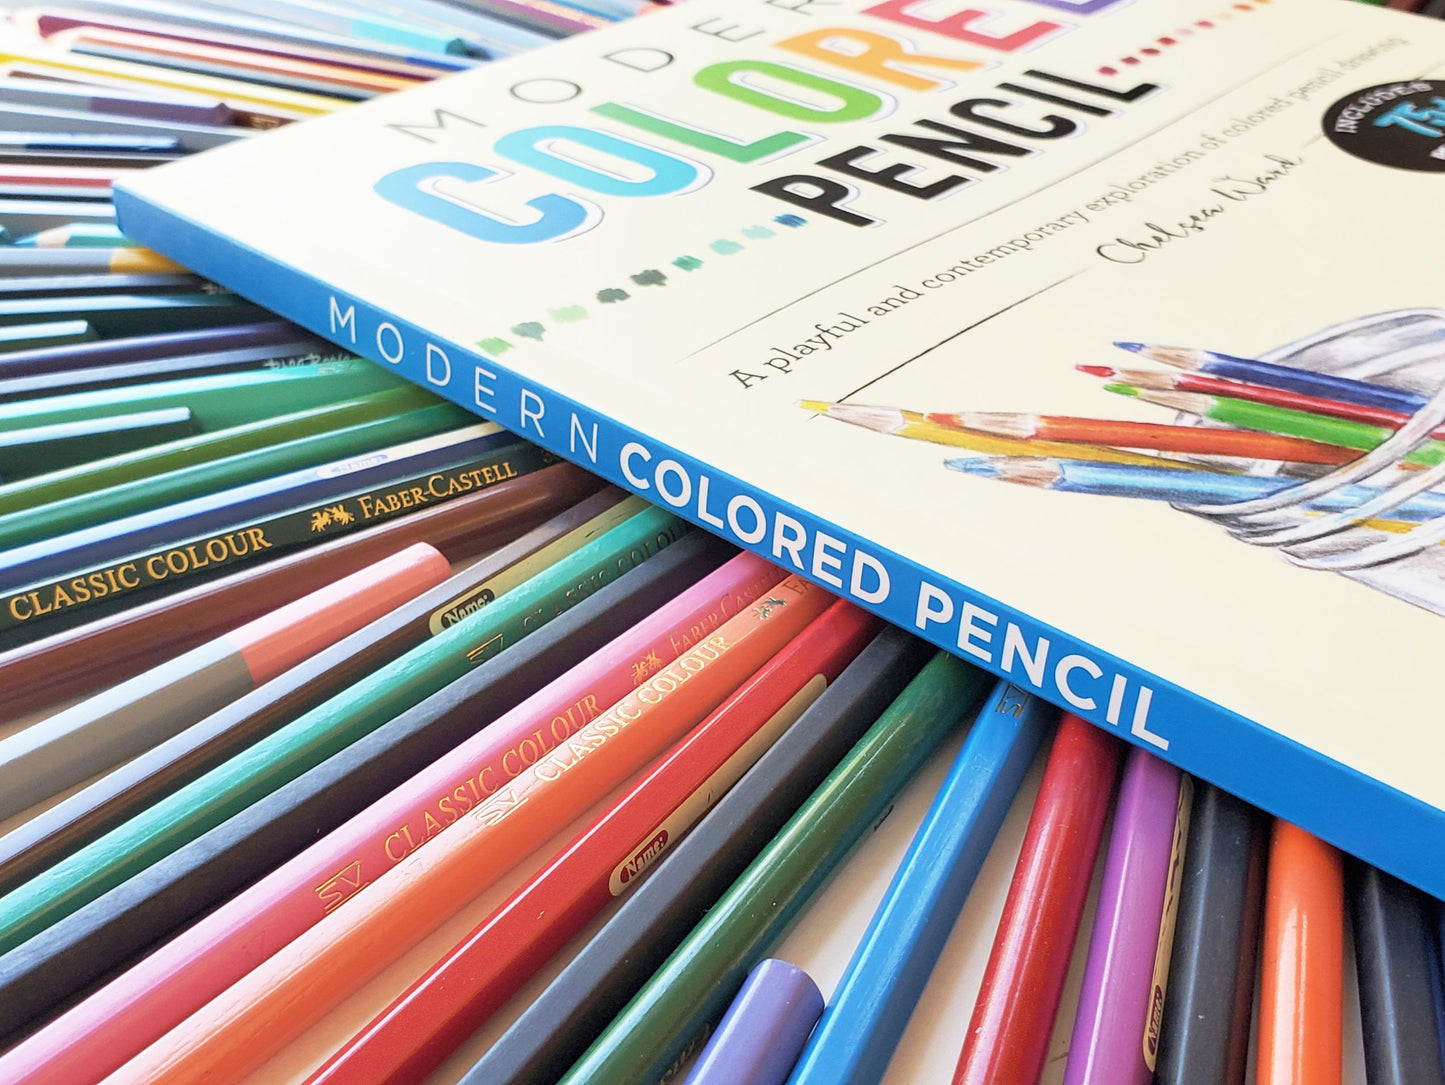 Modern Colored Pencil - Signed Copy